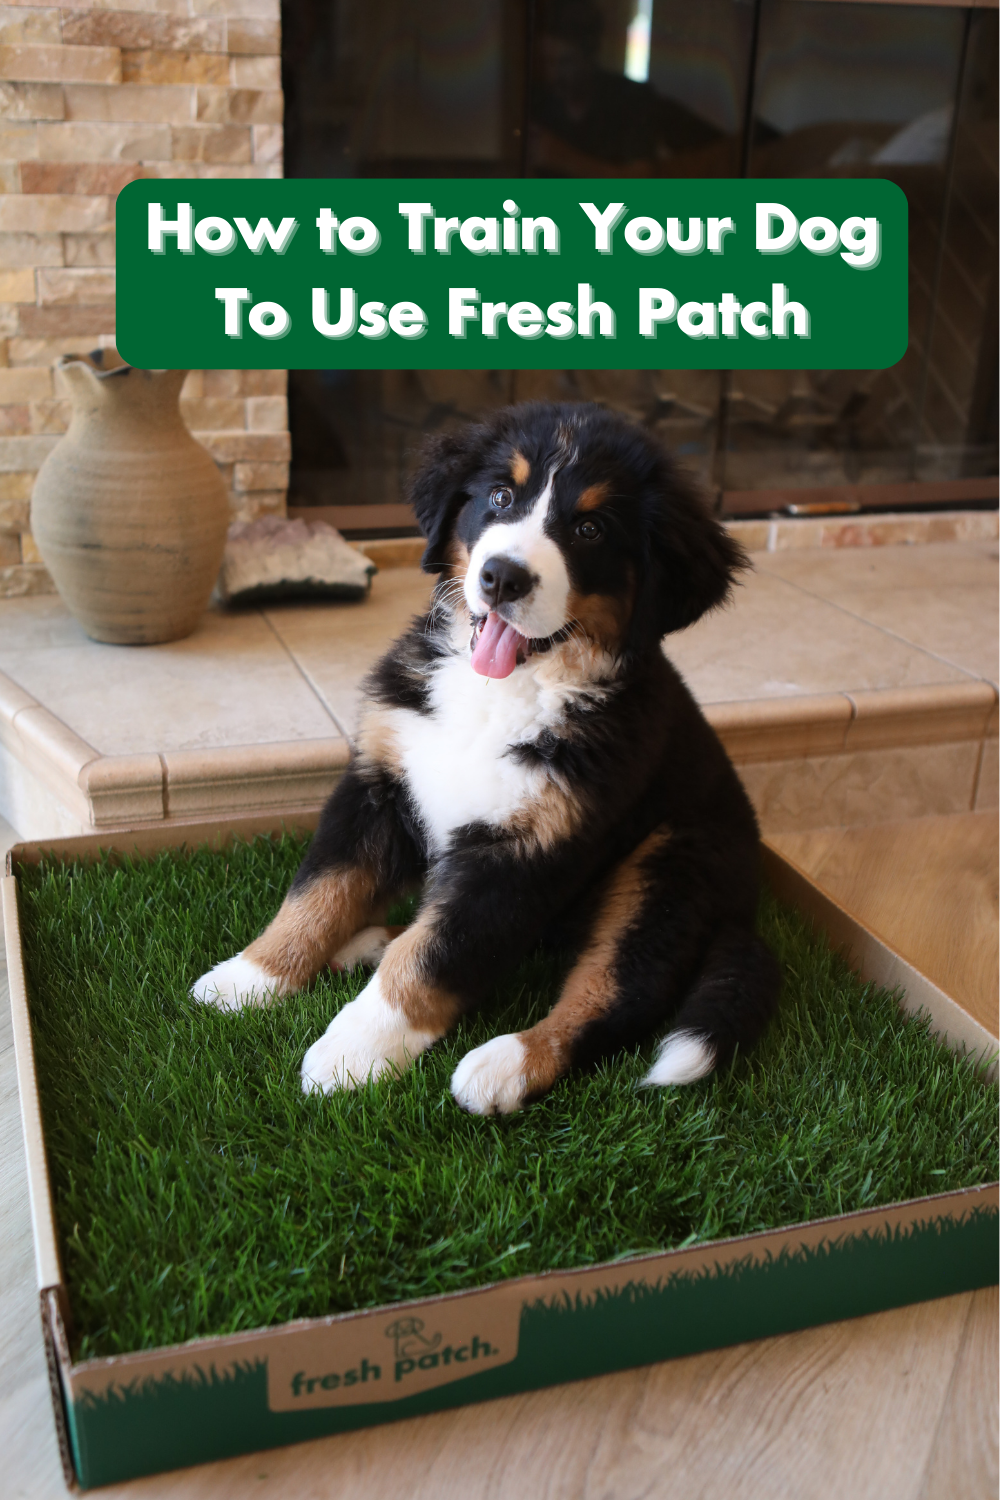 Bernese Mountain Dog Puppy sitting on Fresh Patch real Grass puppy potty training pad